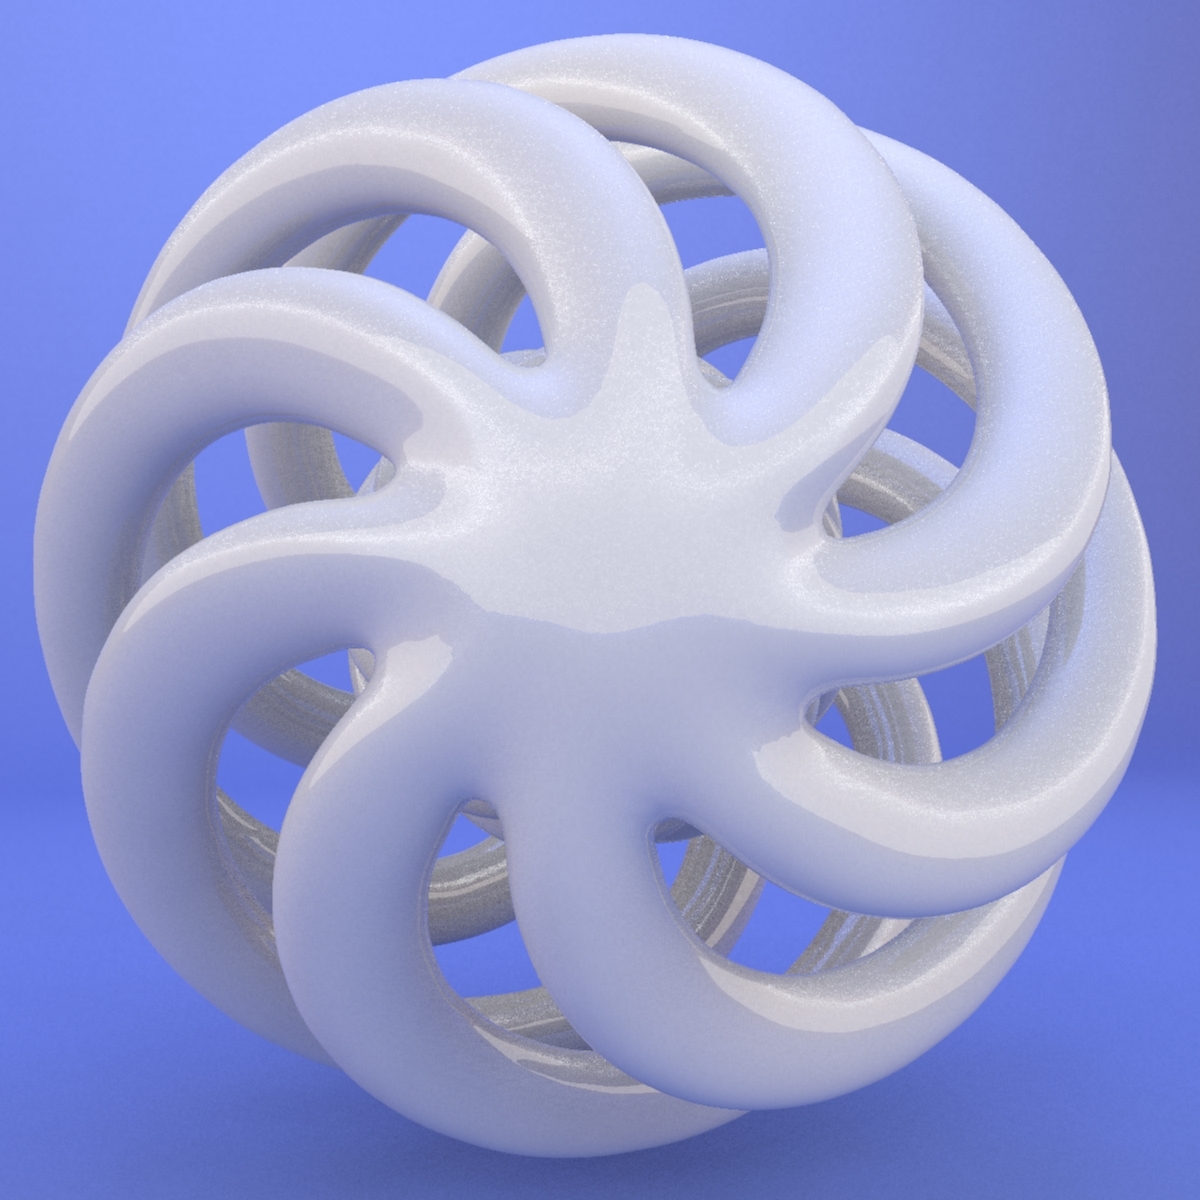 printed-object-3d-max